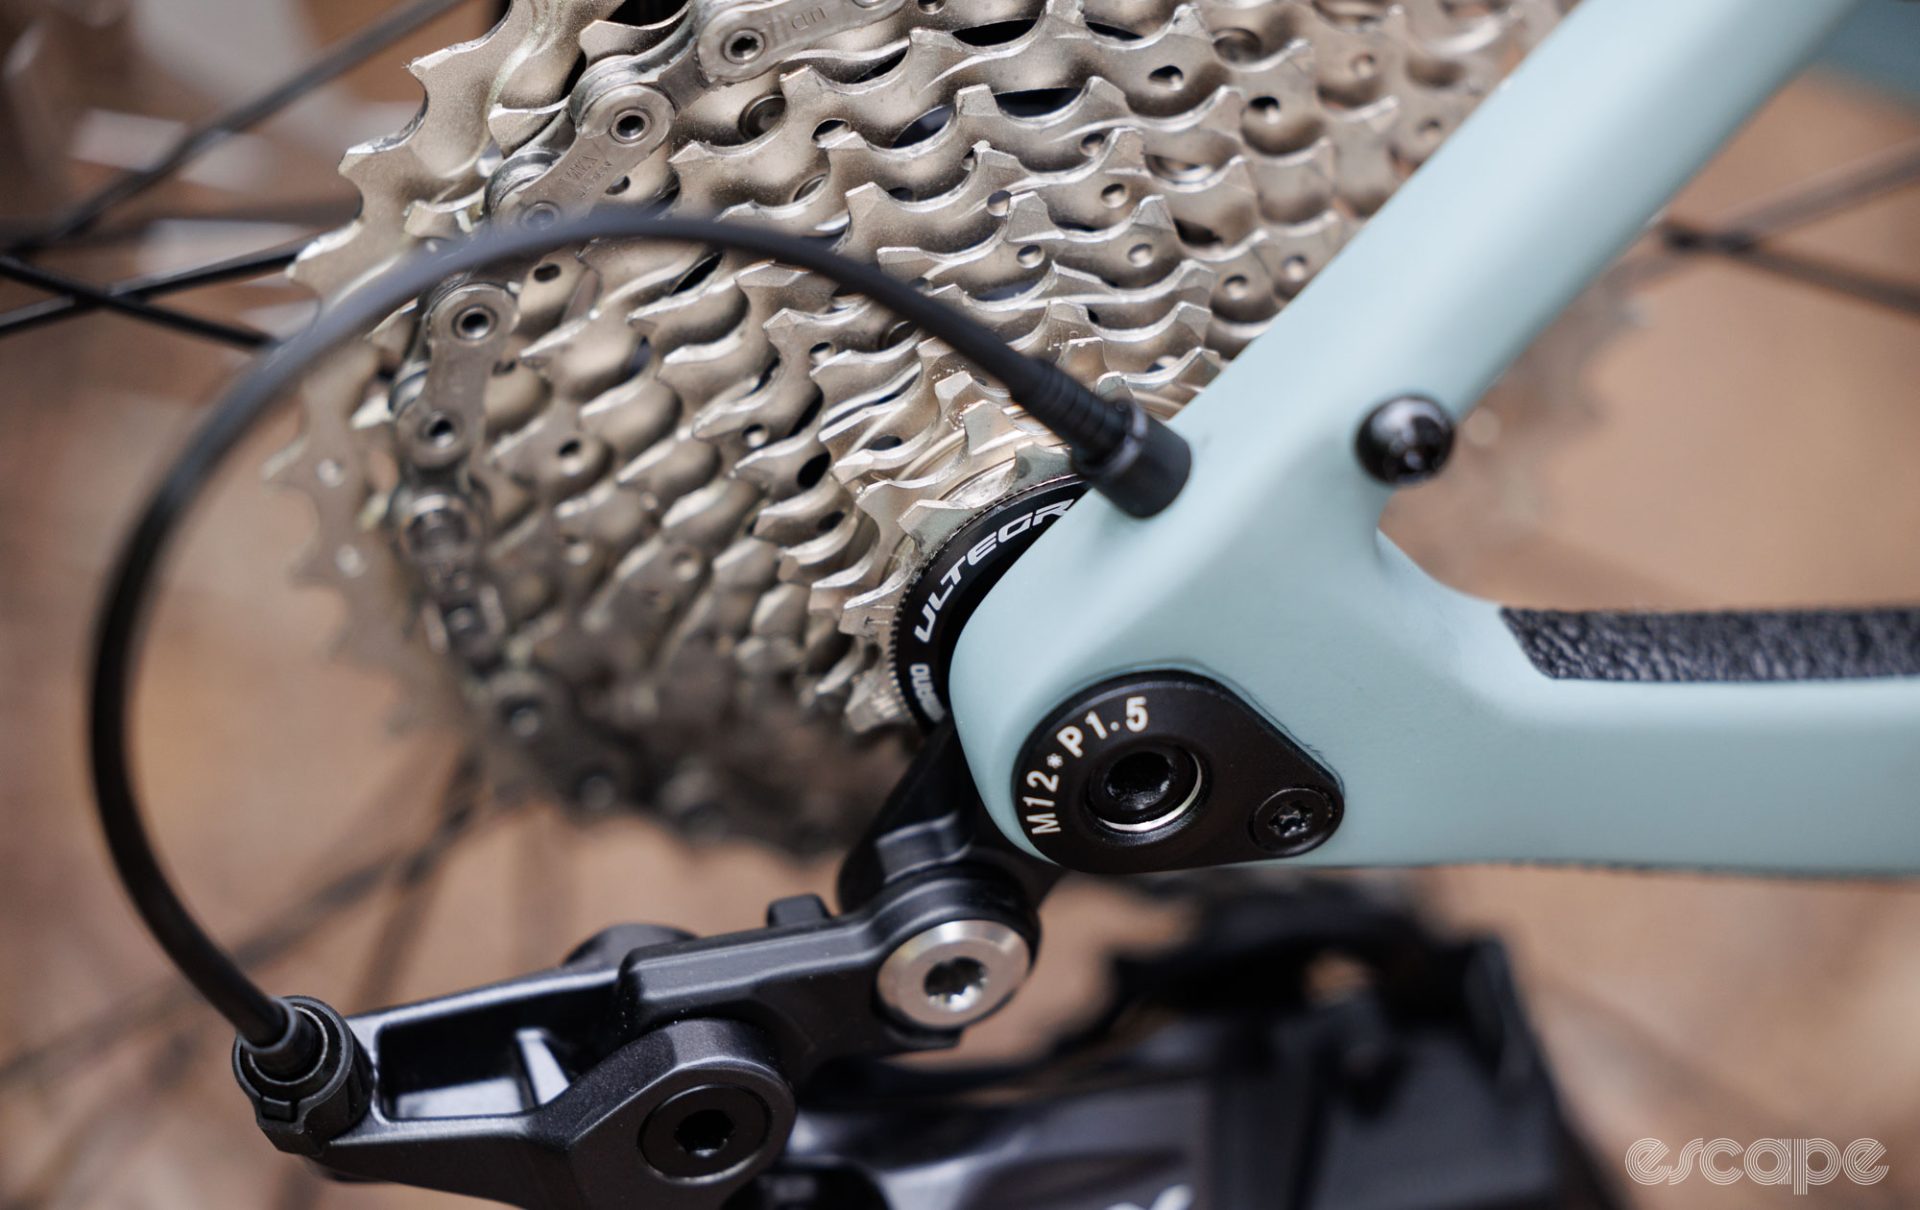 Shimano Ultegra 11-34T cassette shown with GRX> 